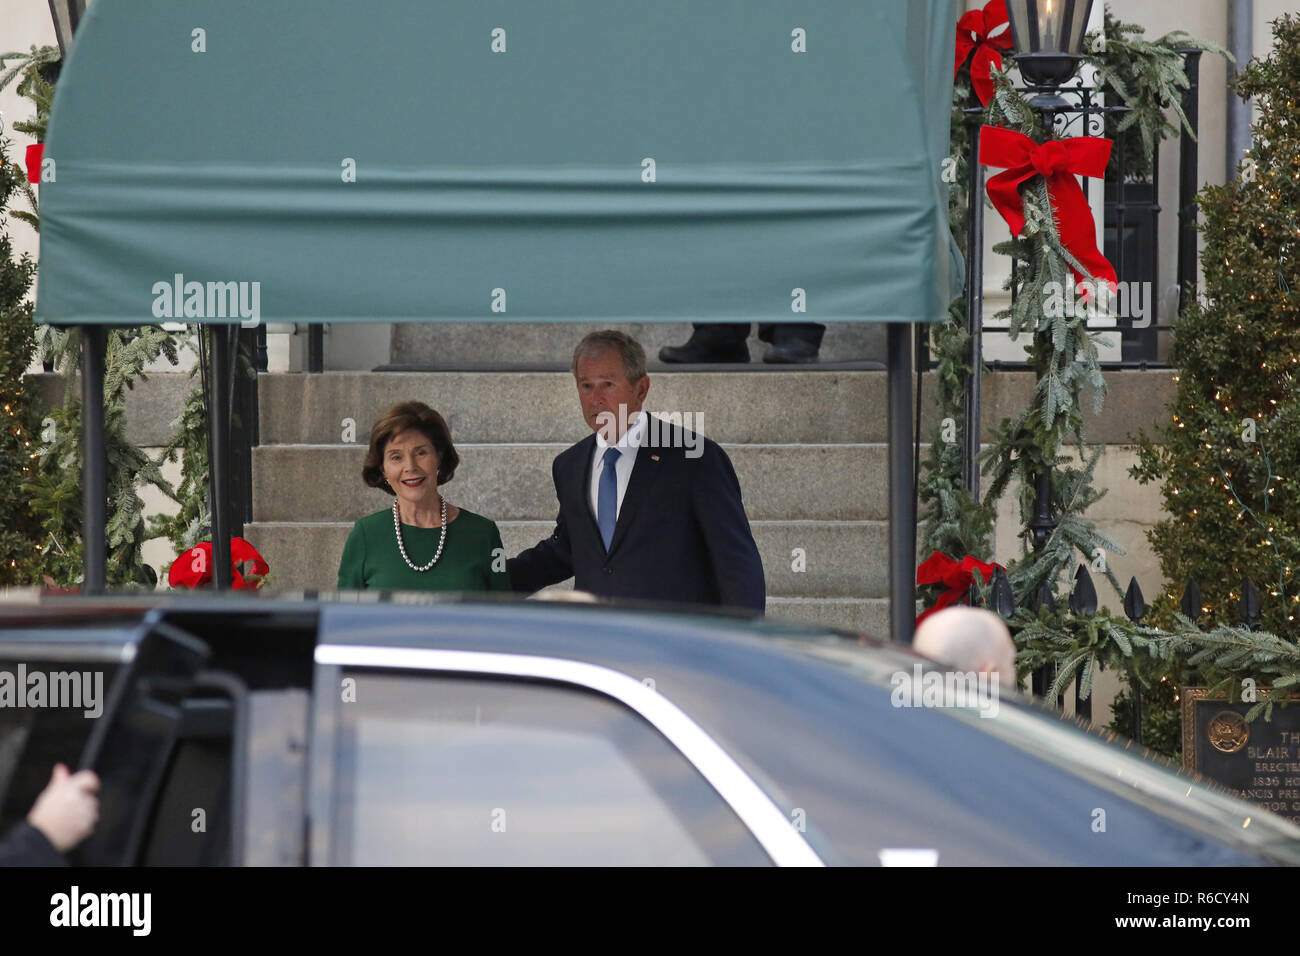 Washington, District of Columbia, USA. 4th Dec, 2018. Former United States President George W. Bush and former first lady Laura Bush welcome US President Donald J. Trump and First lady Melania Trump as they arrive at Blair House for a visit prior to the State Funeral tomorrow for former US President George H.W. Bush, in Washington, DC, December 4, 2018 Credit: Martin H. Simon/CNP/ZUMA Wire/Alamy Live News Stock Photo